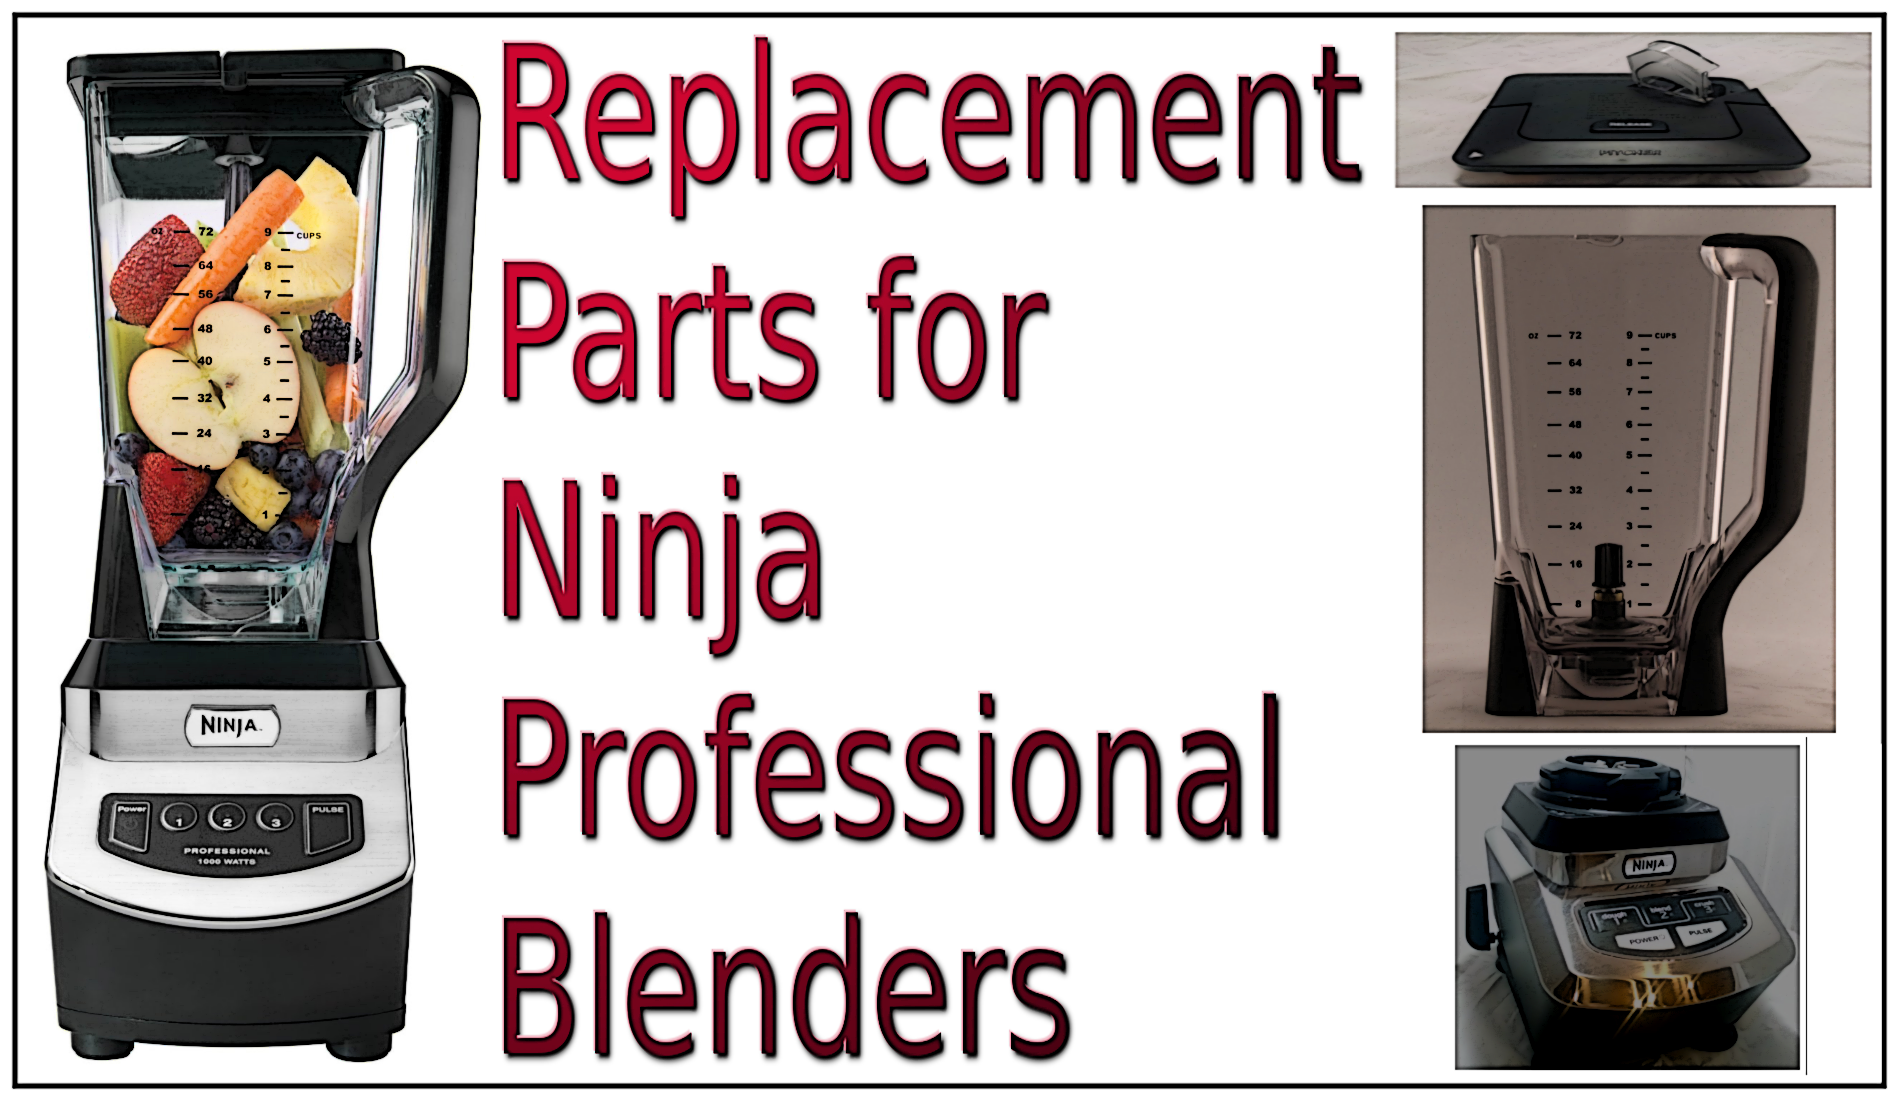 Replacement Parts for Ninja Professional Blenders